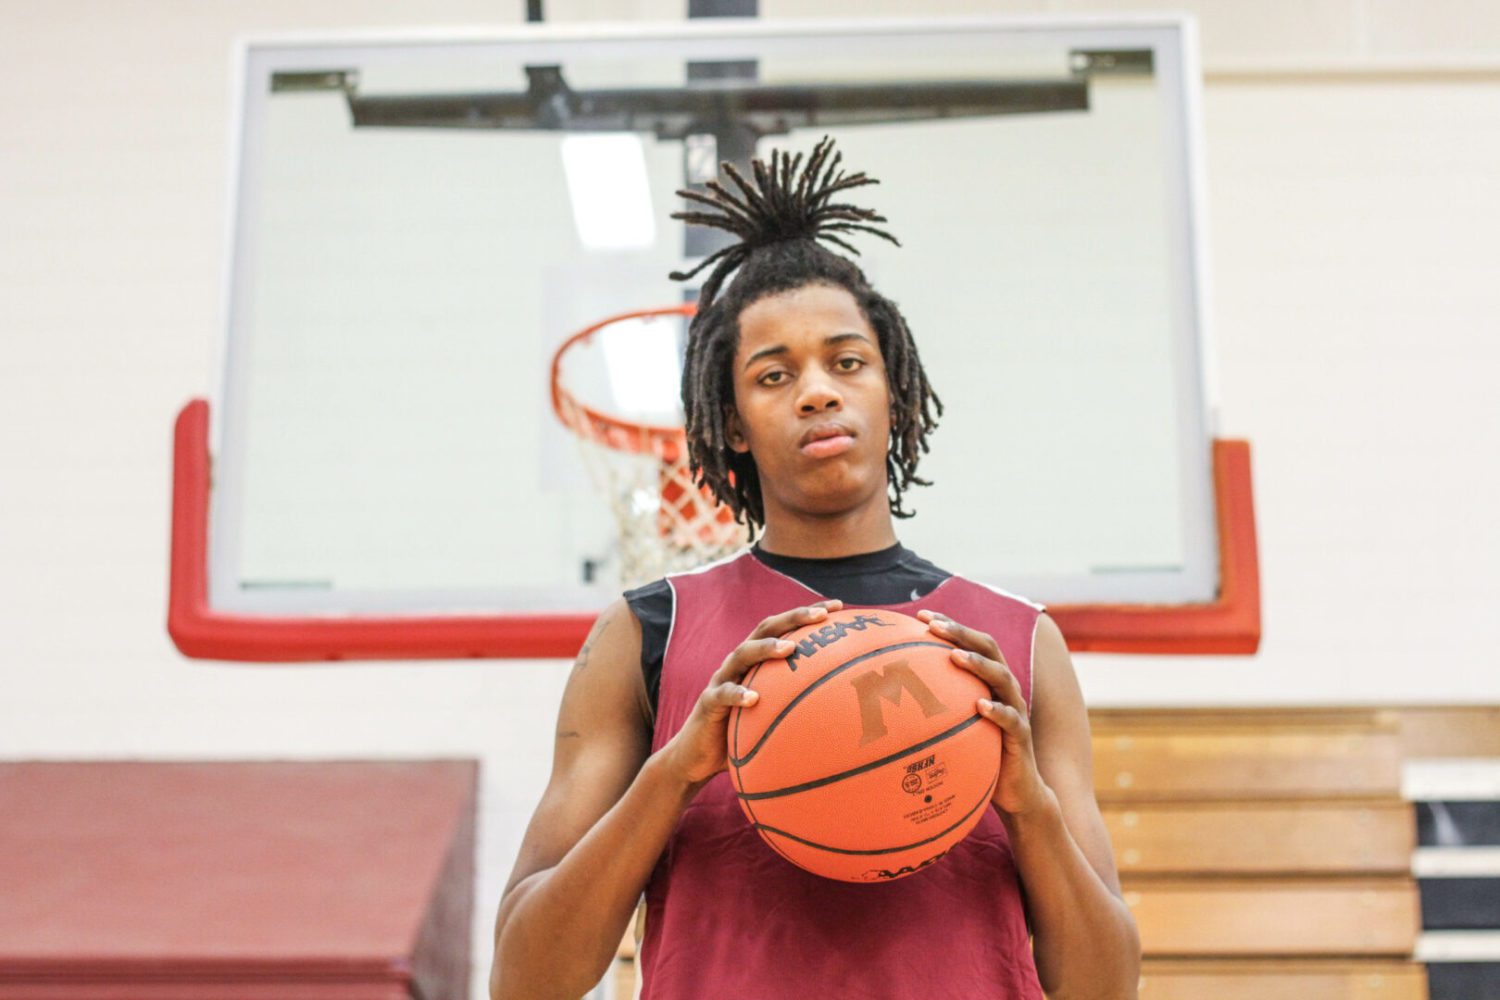 Muskegon’s Deyonta Davis named Mr. Basketball; Big Reds make it two winners in a row